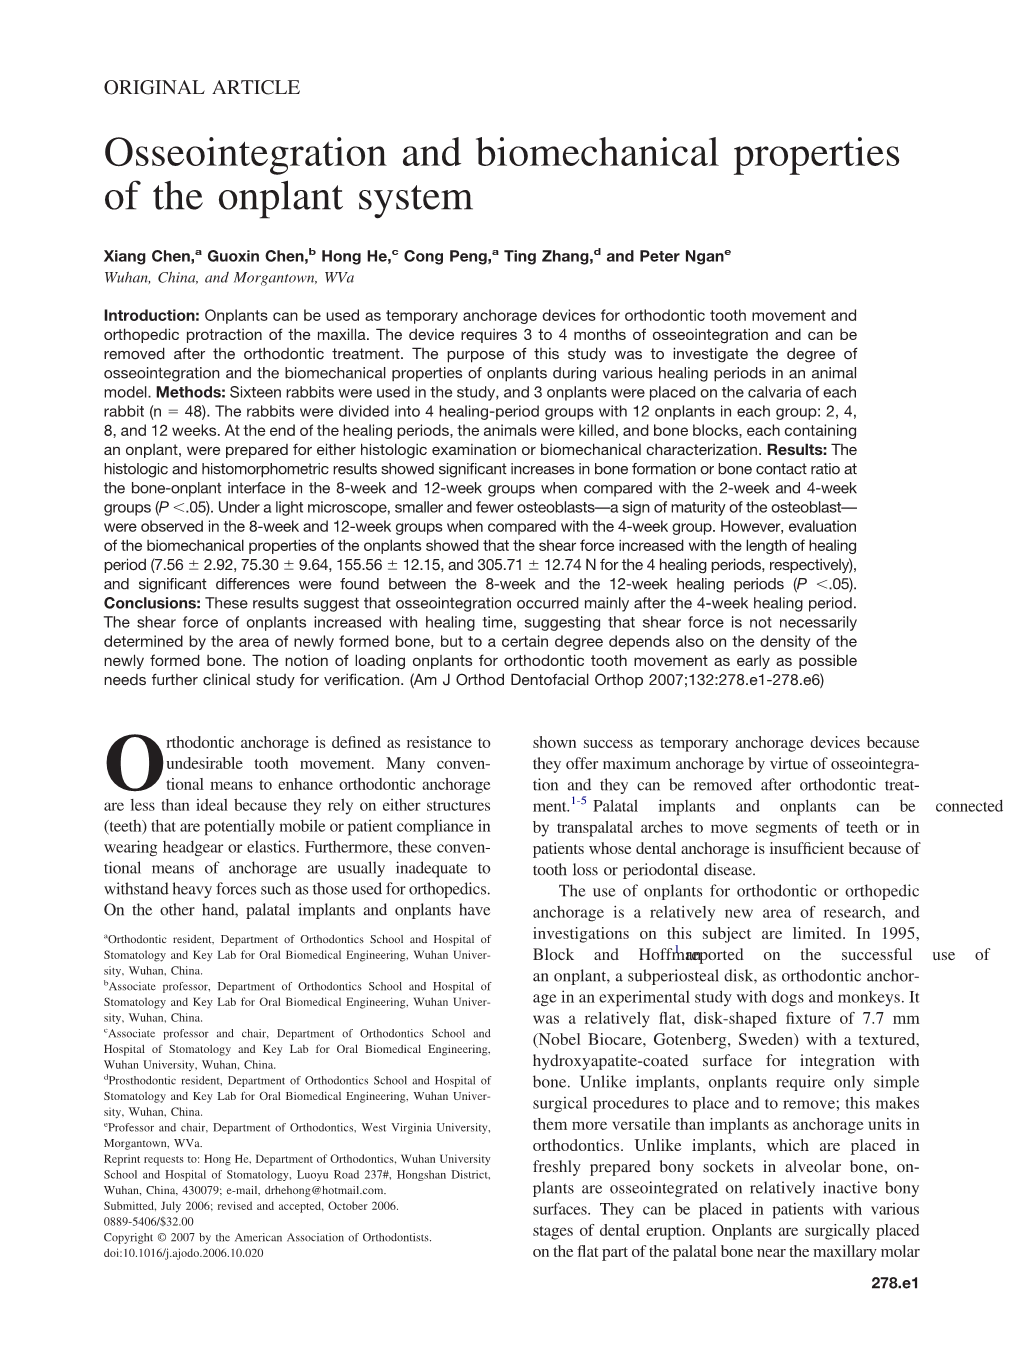 Osseointegration and Biomechanical Properties of the Onplant System